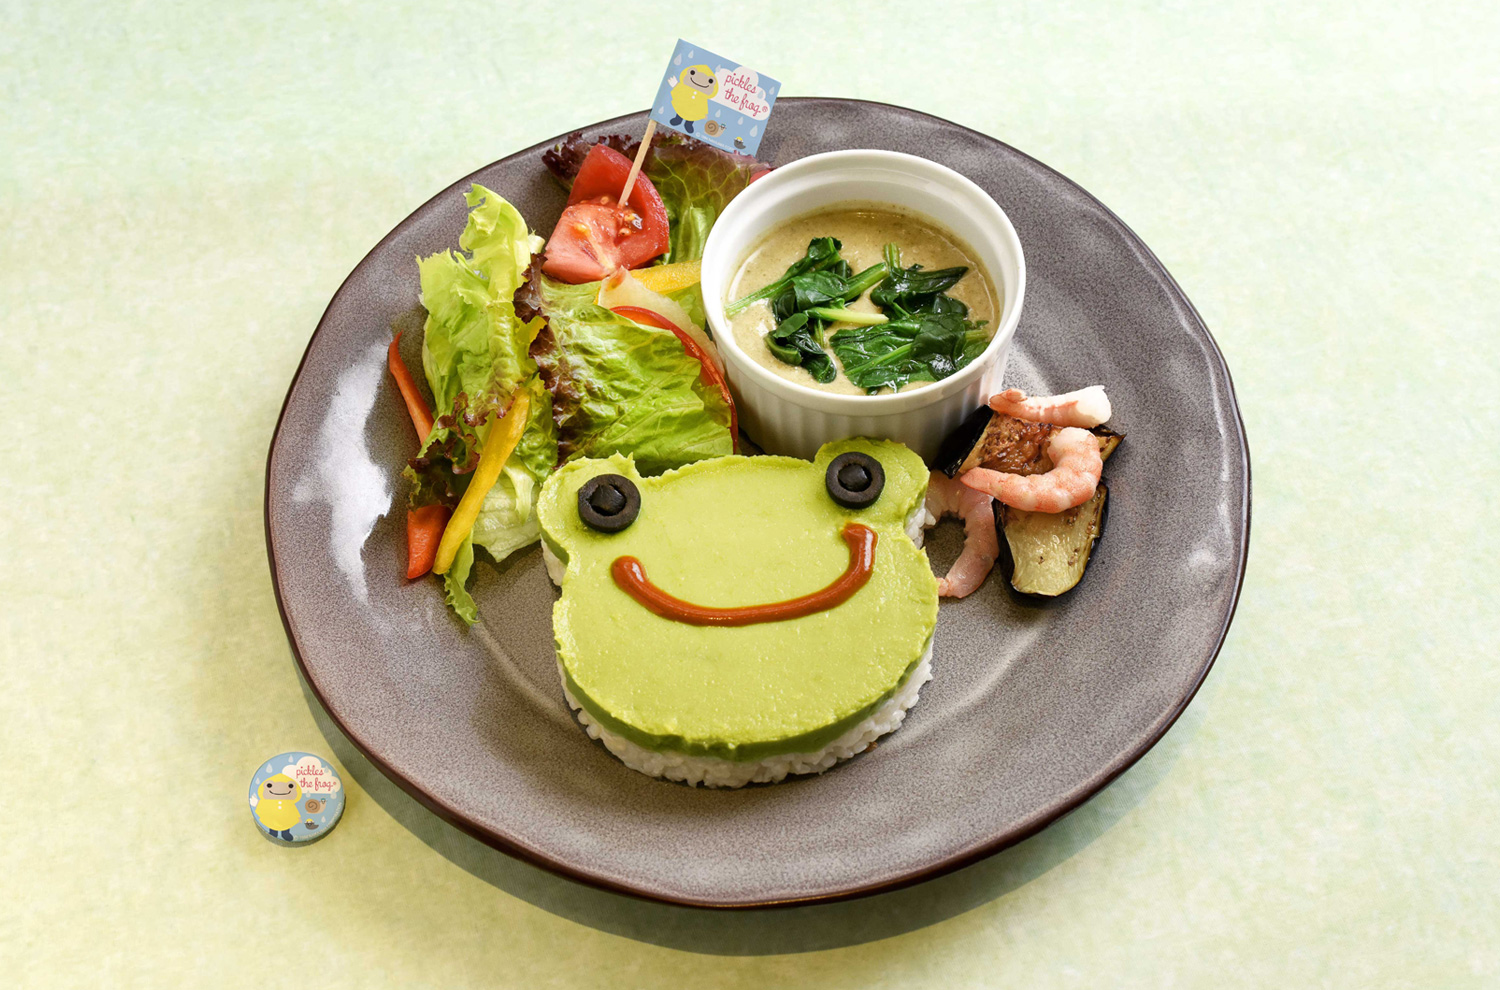 Ryokotomo - 76ca0272 stuffed animal pickles the frog inspires limited time collaboration cafe